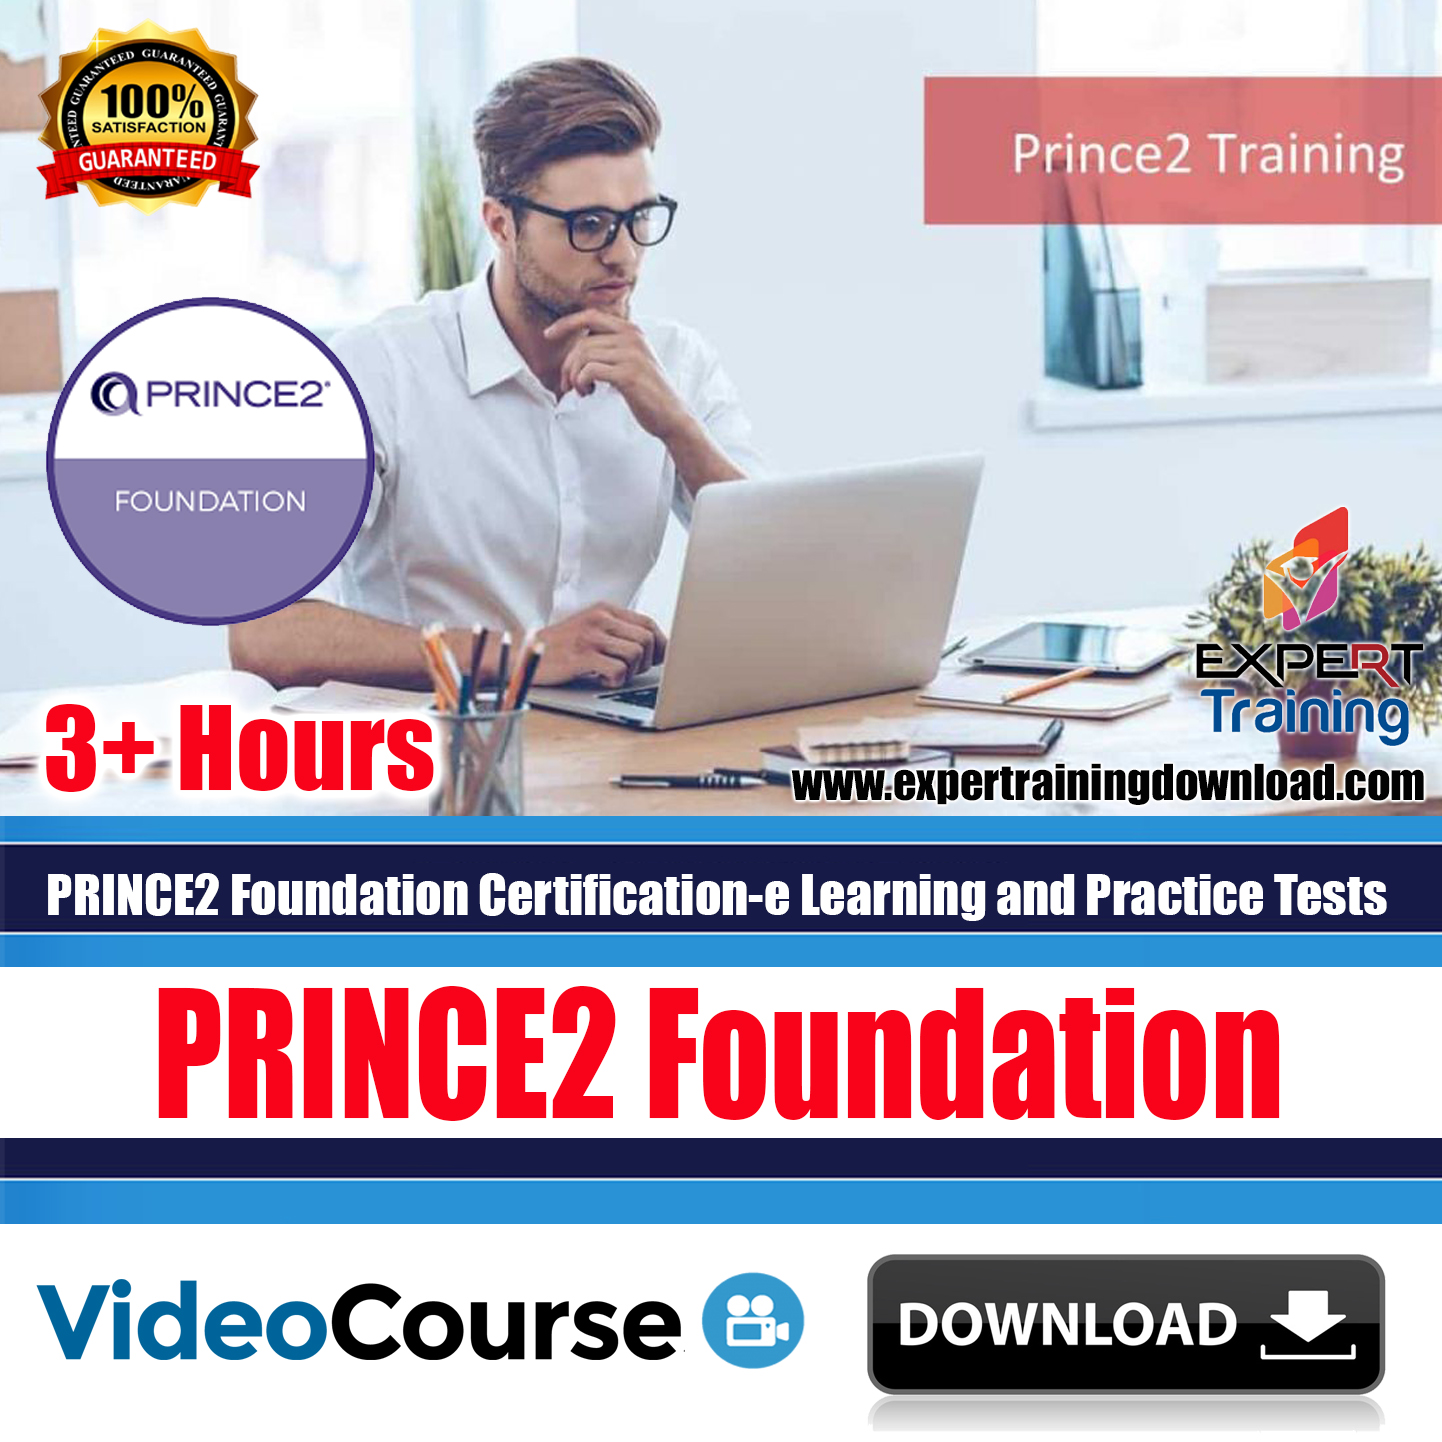 PRINCE2 Foundation Certification-e Learning and Practice Tests